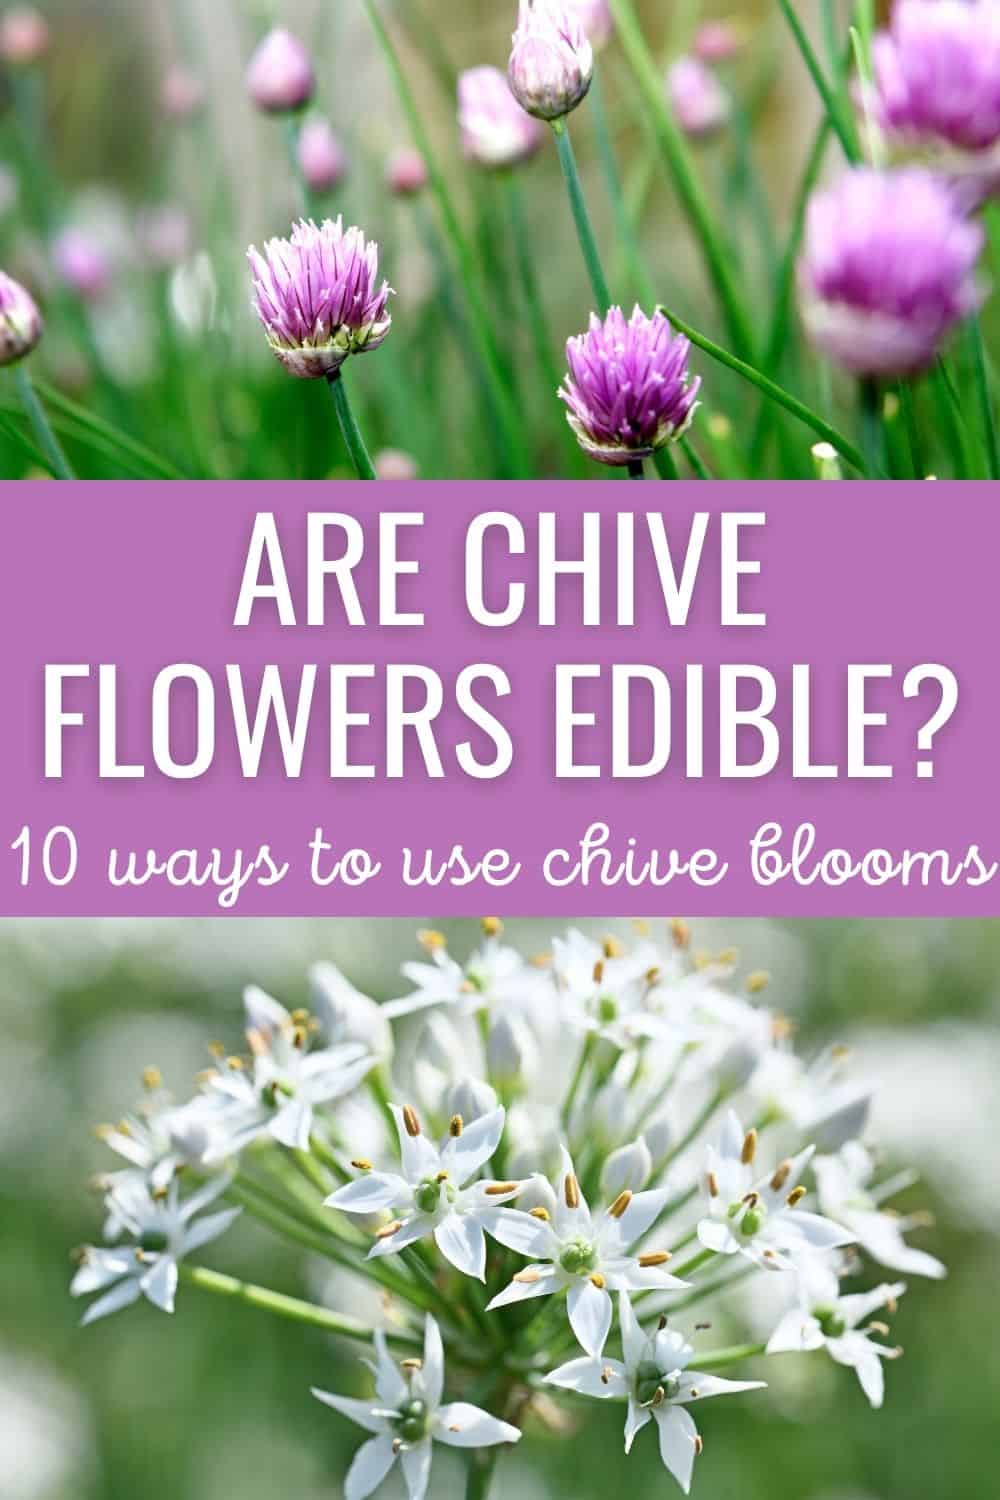 Are chive flowers edible? 